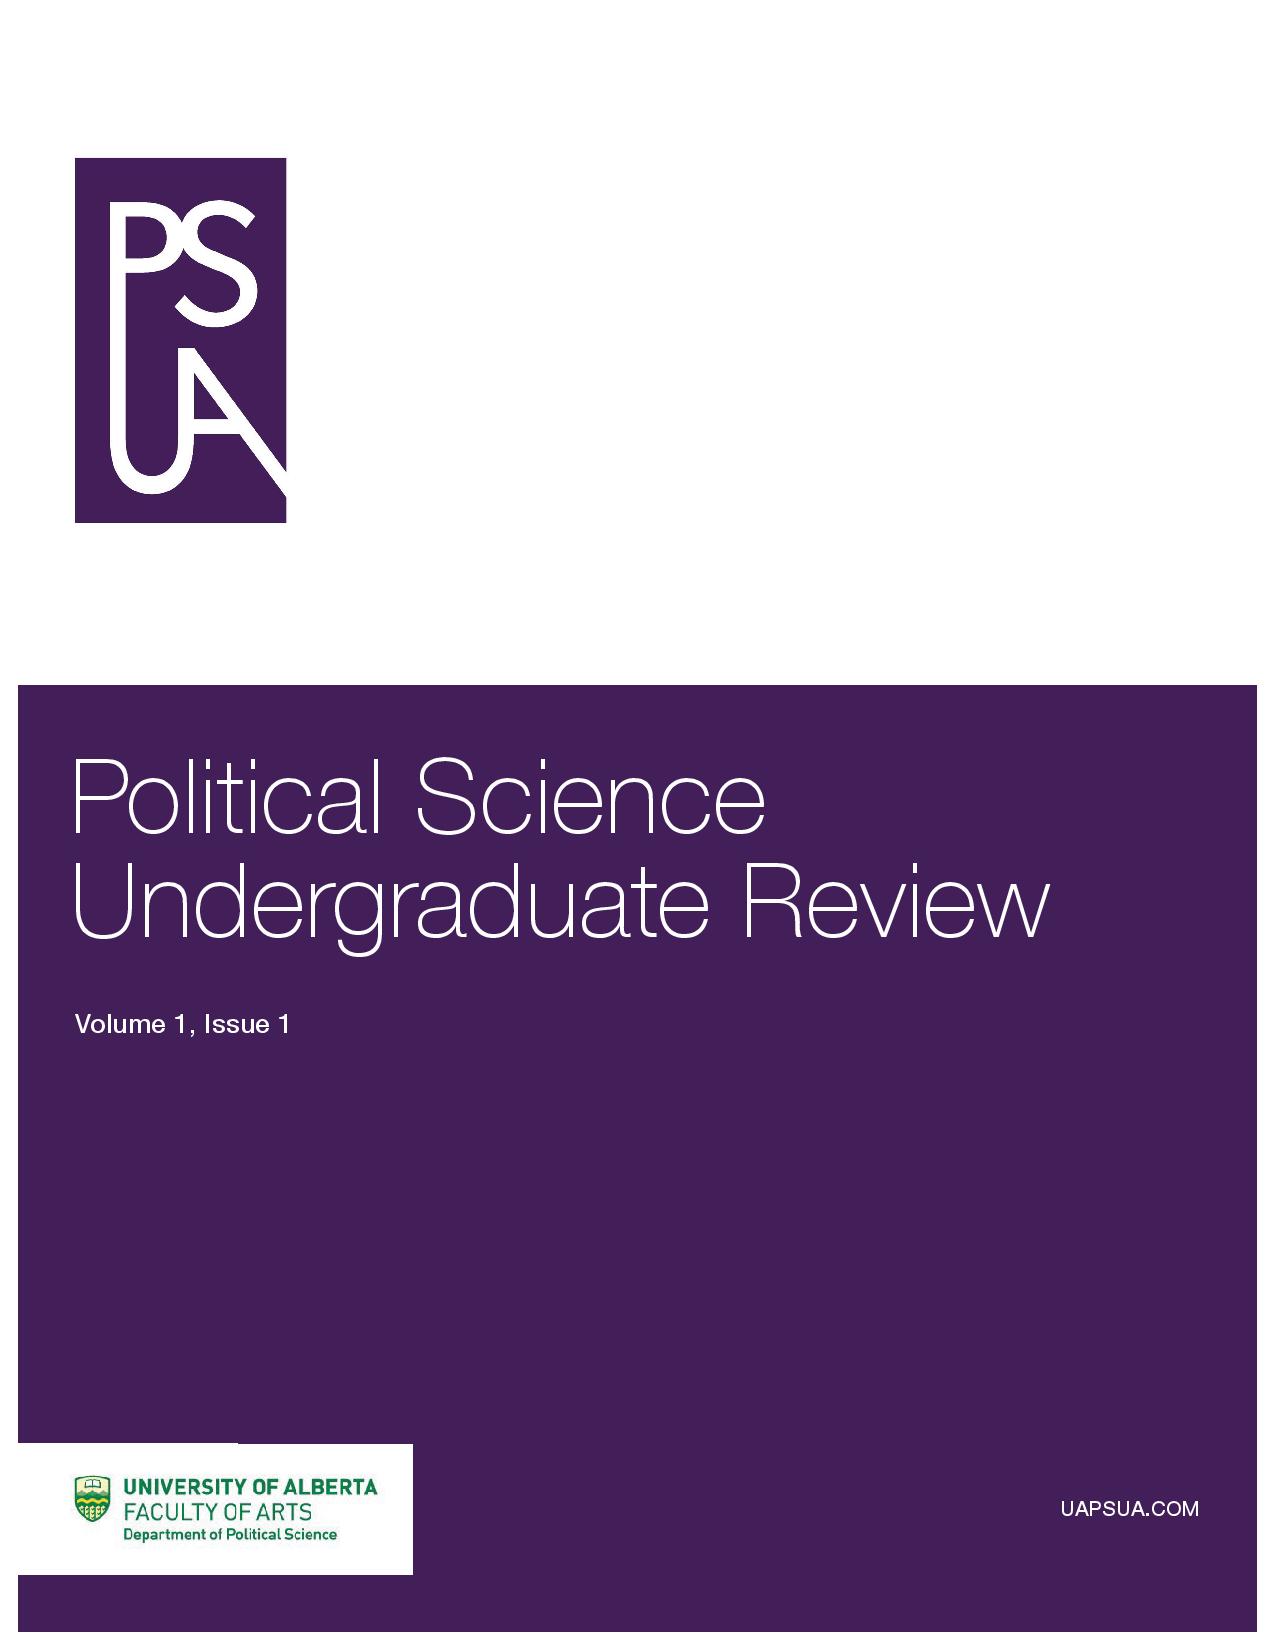 					View Vol. 1 No. 1 (2015): Political Science Undergraduate Review: Vol 1, Issue 1
				